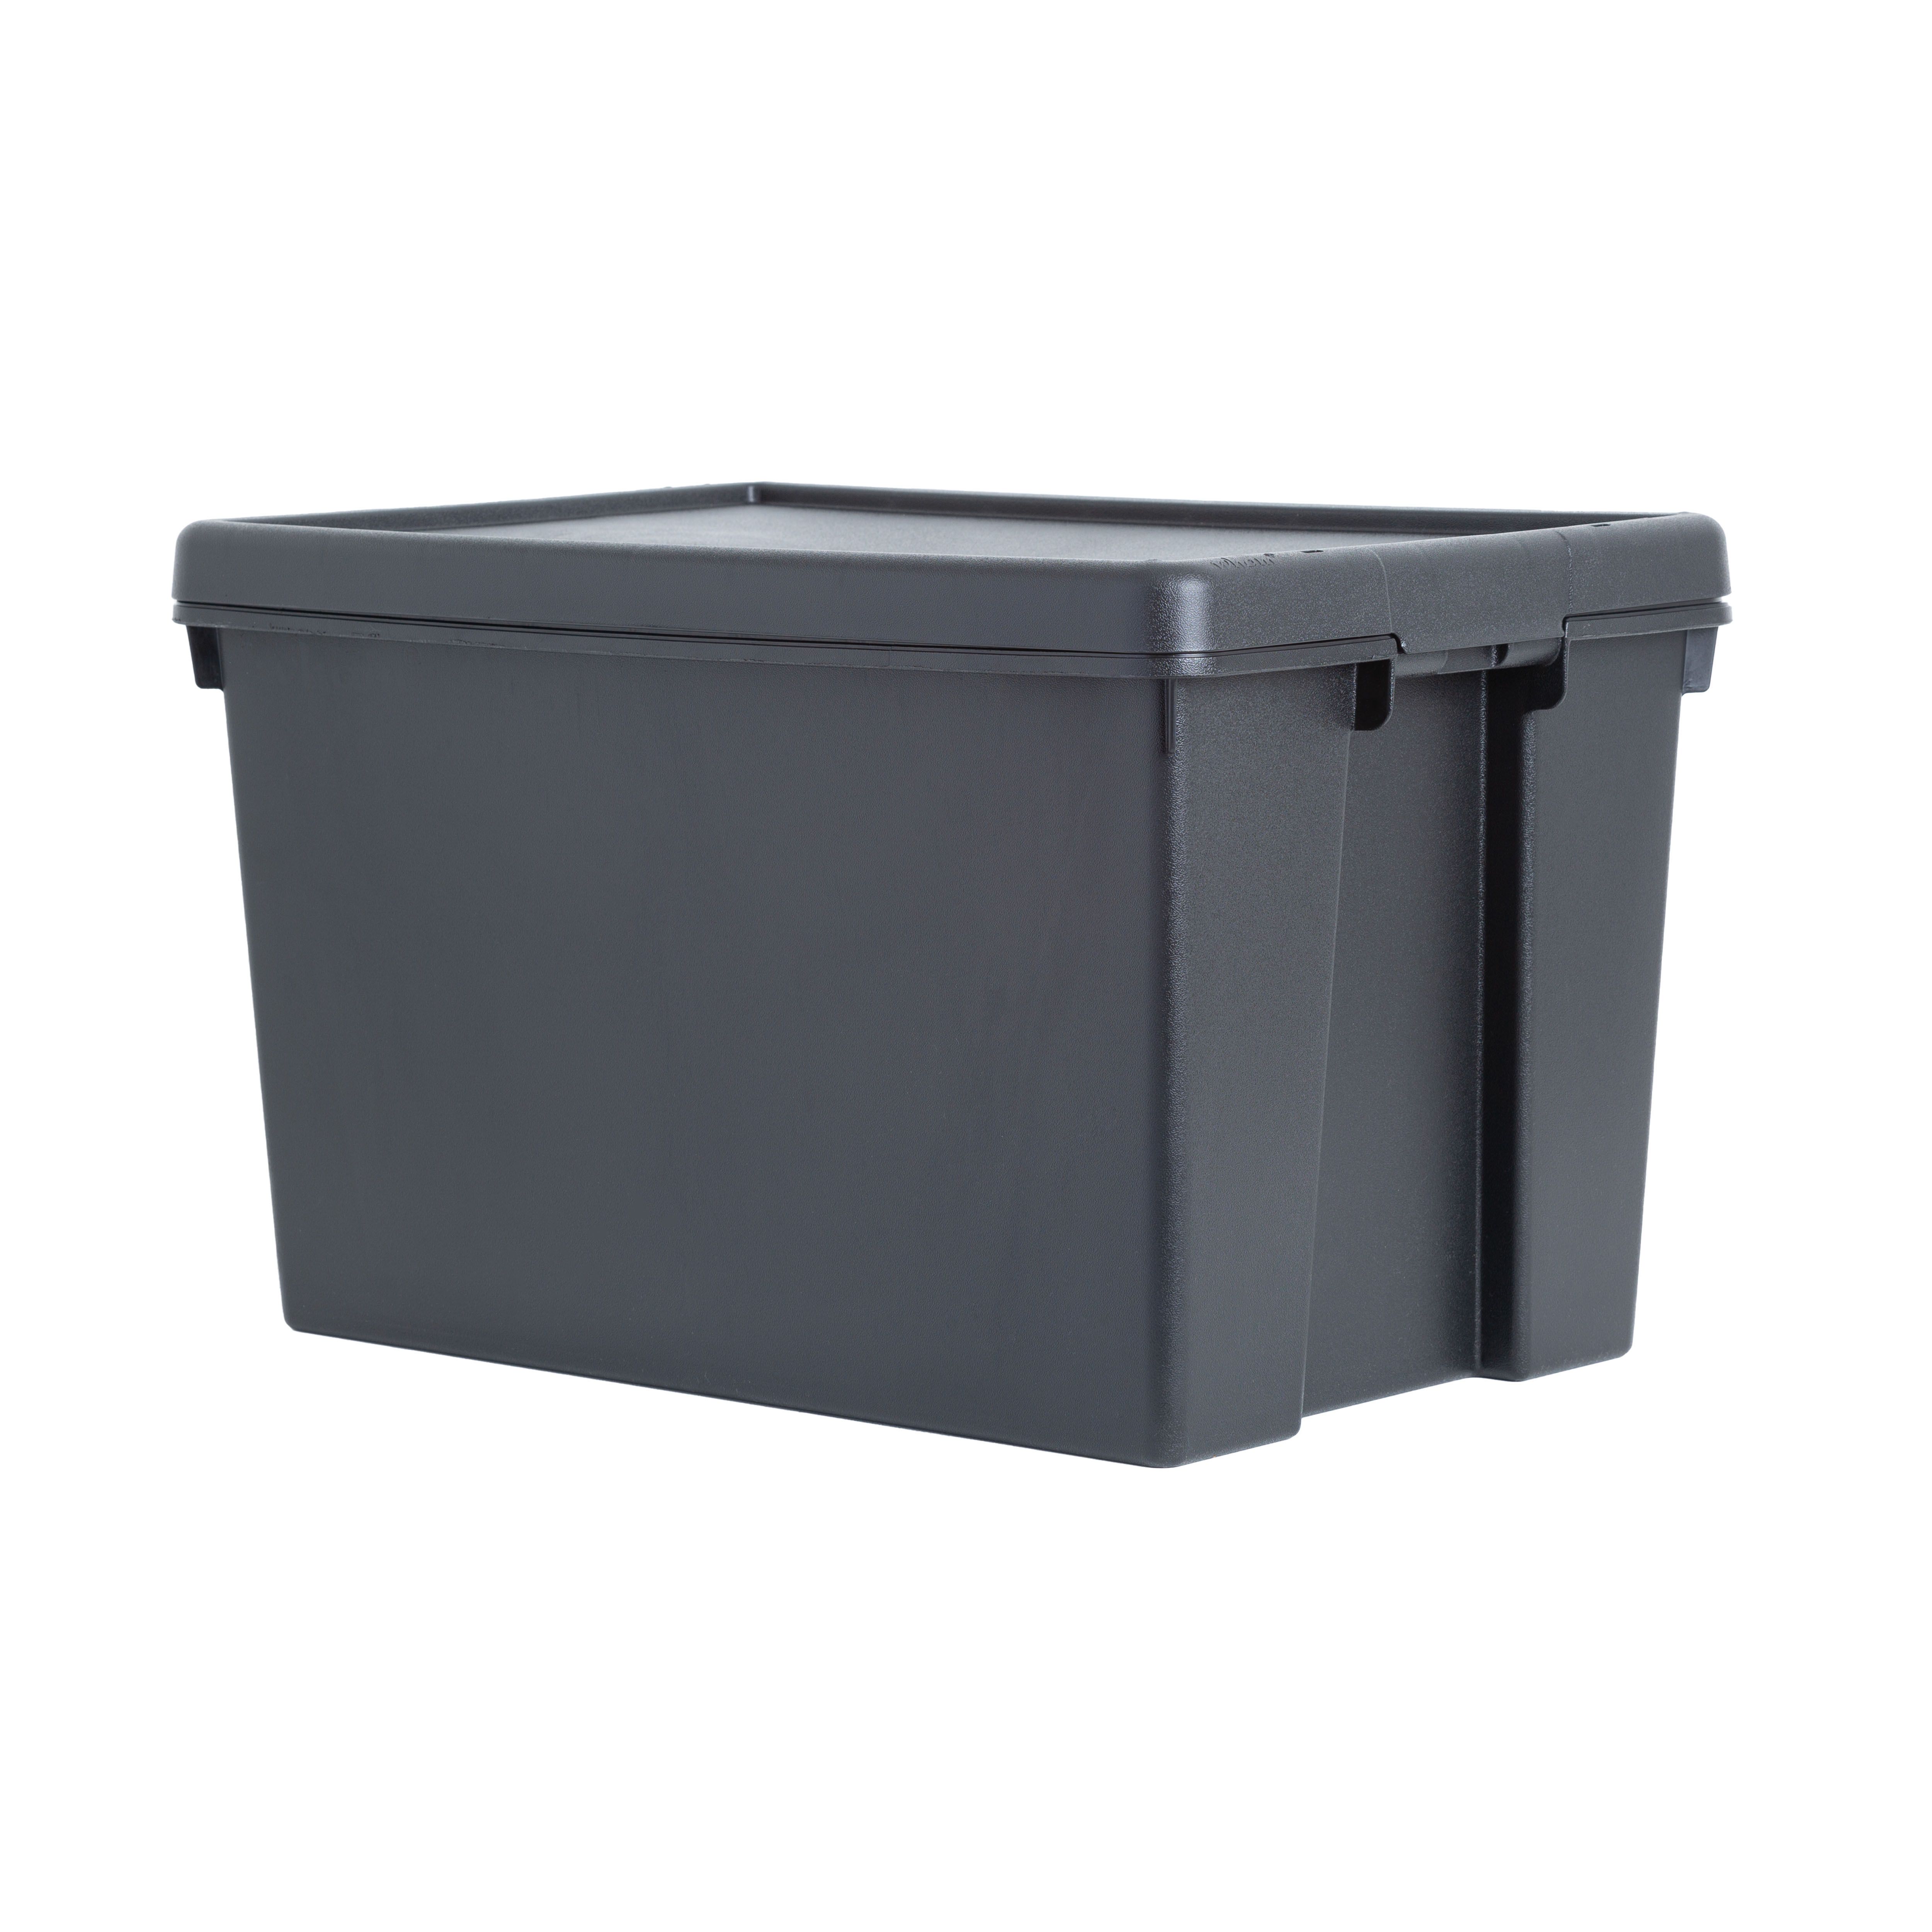 Wham Bam Heavy duty Black 62L Large Stackable Storage box with Lid ...